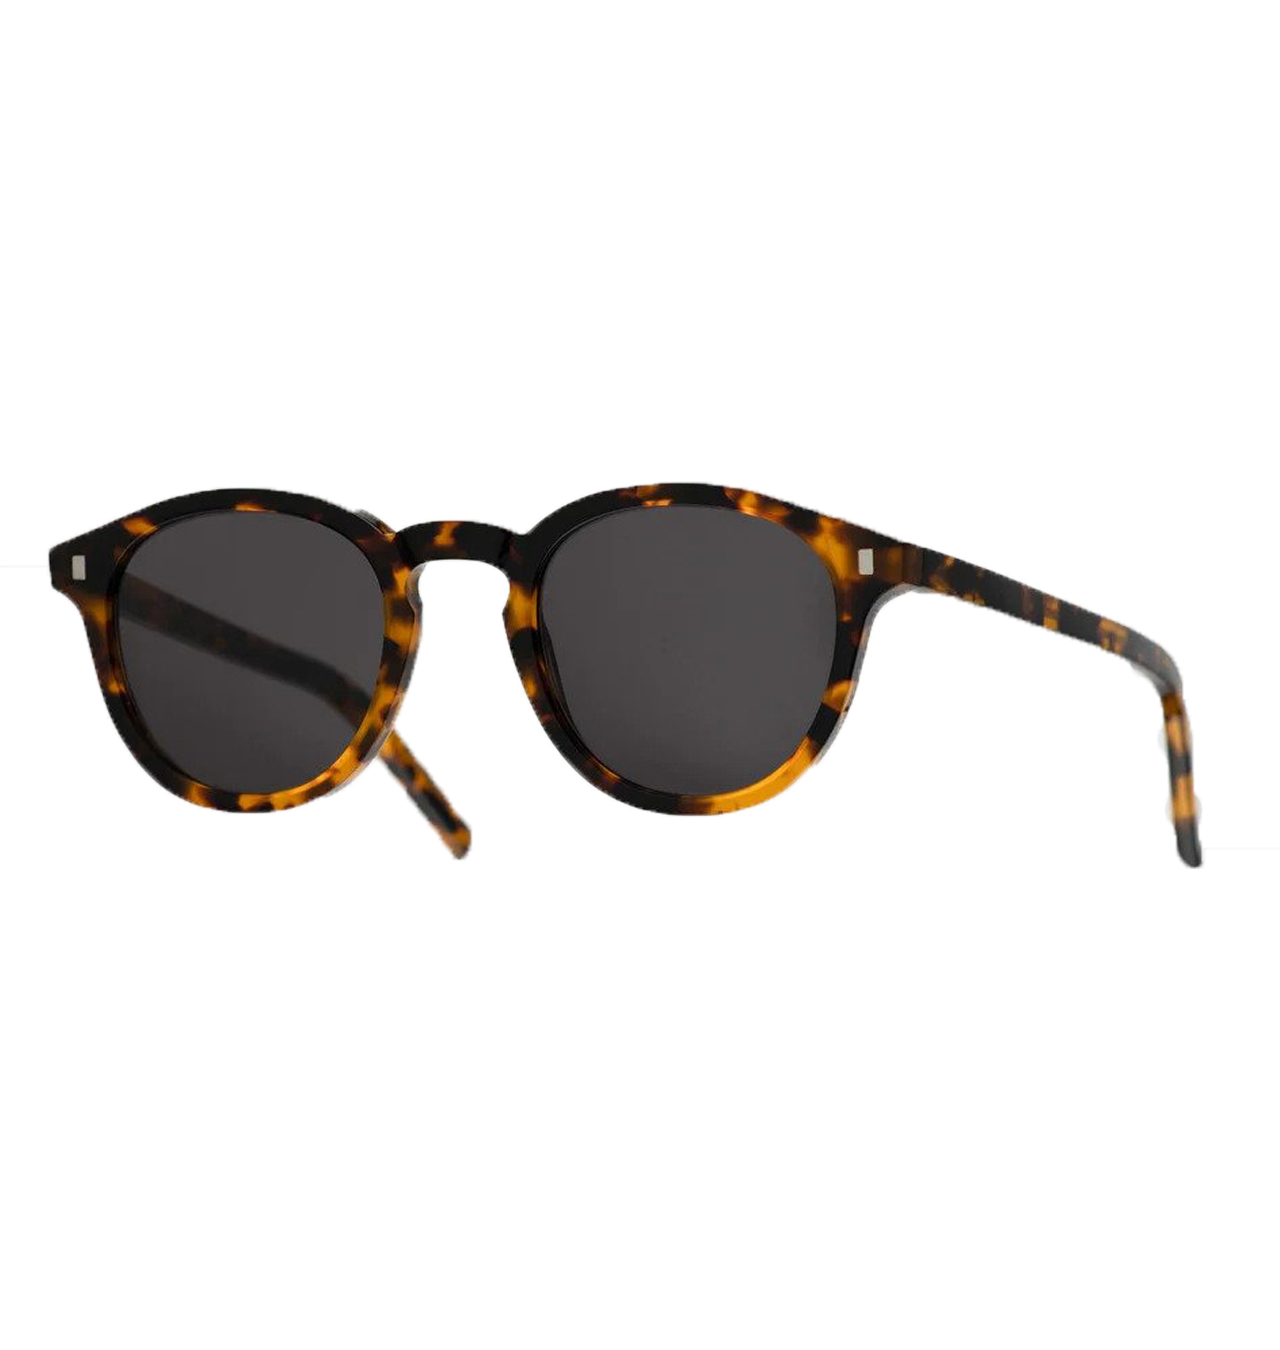 Buy Tom Ford Men Square Havana Sunglasses Online - 952482 | The Collective